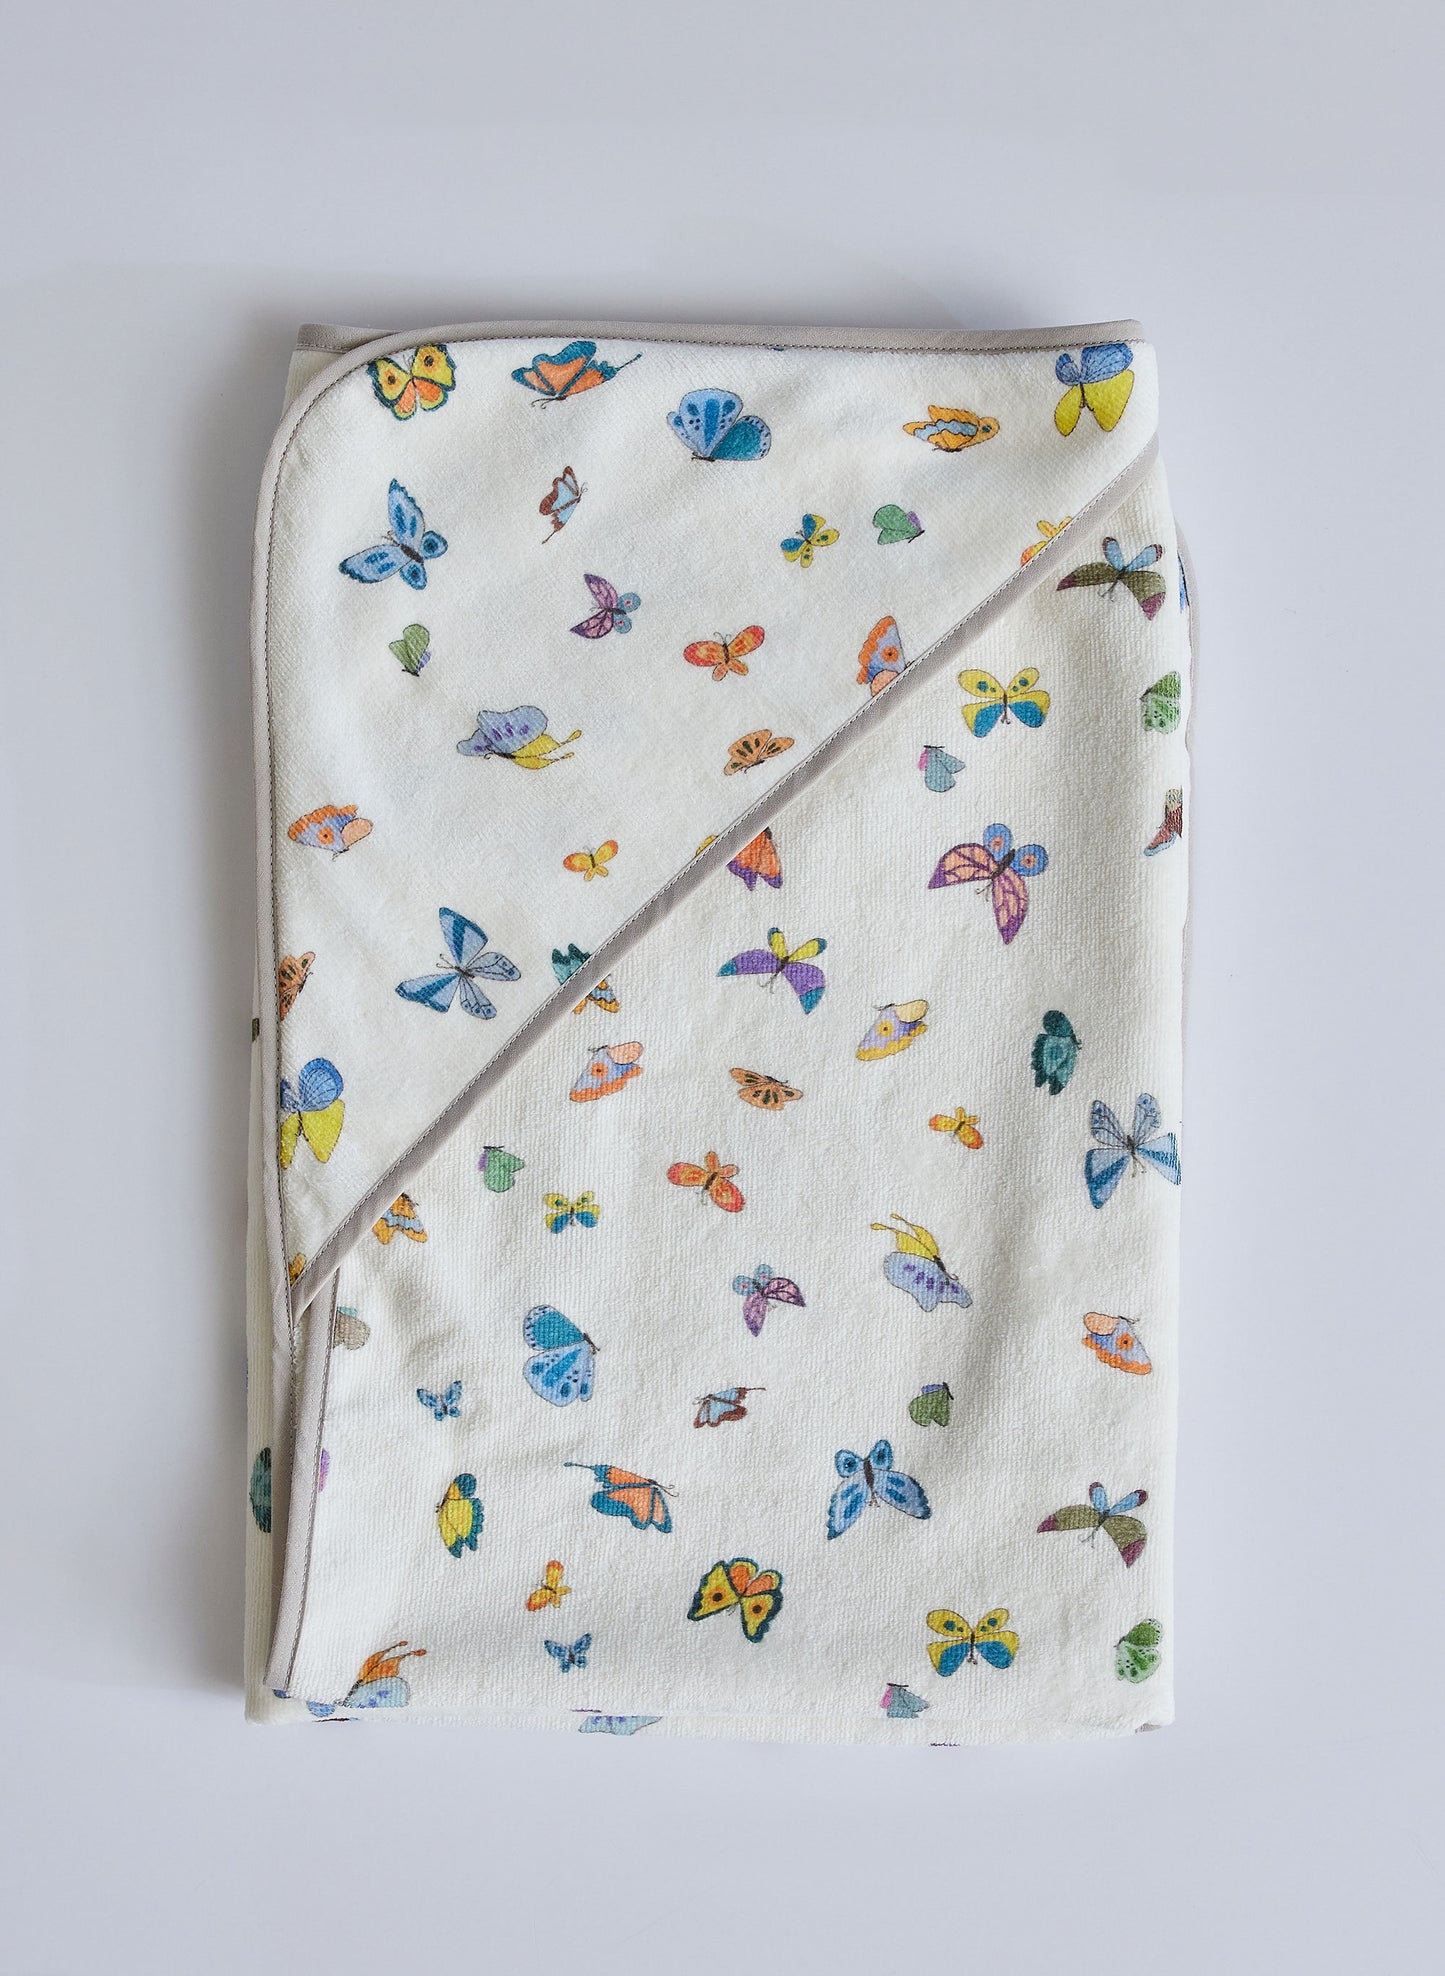 Madame Butterfly Hooded Bath Towel